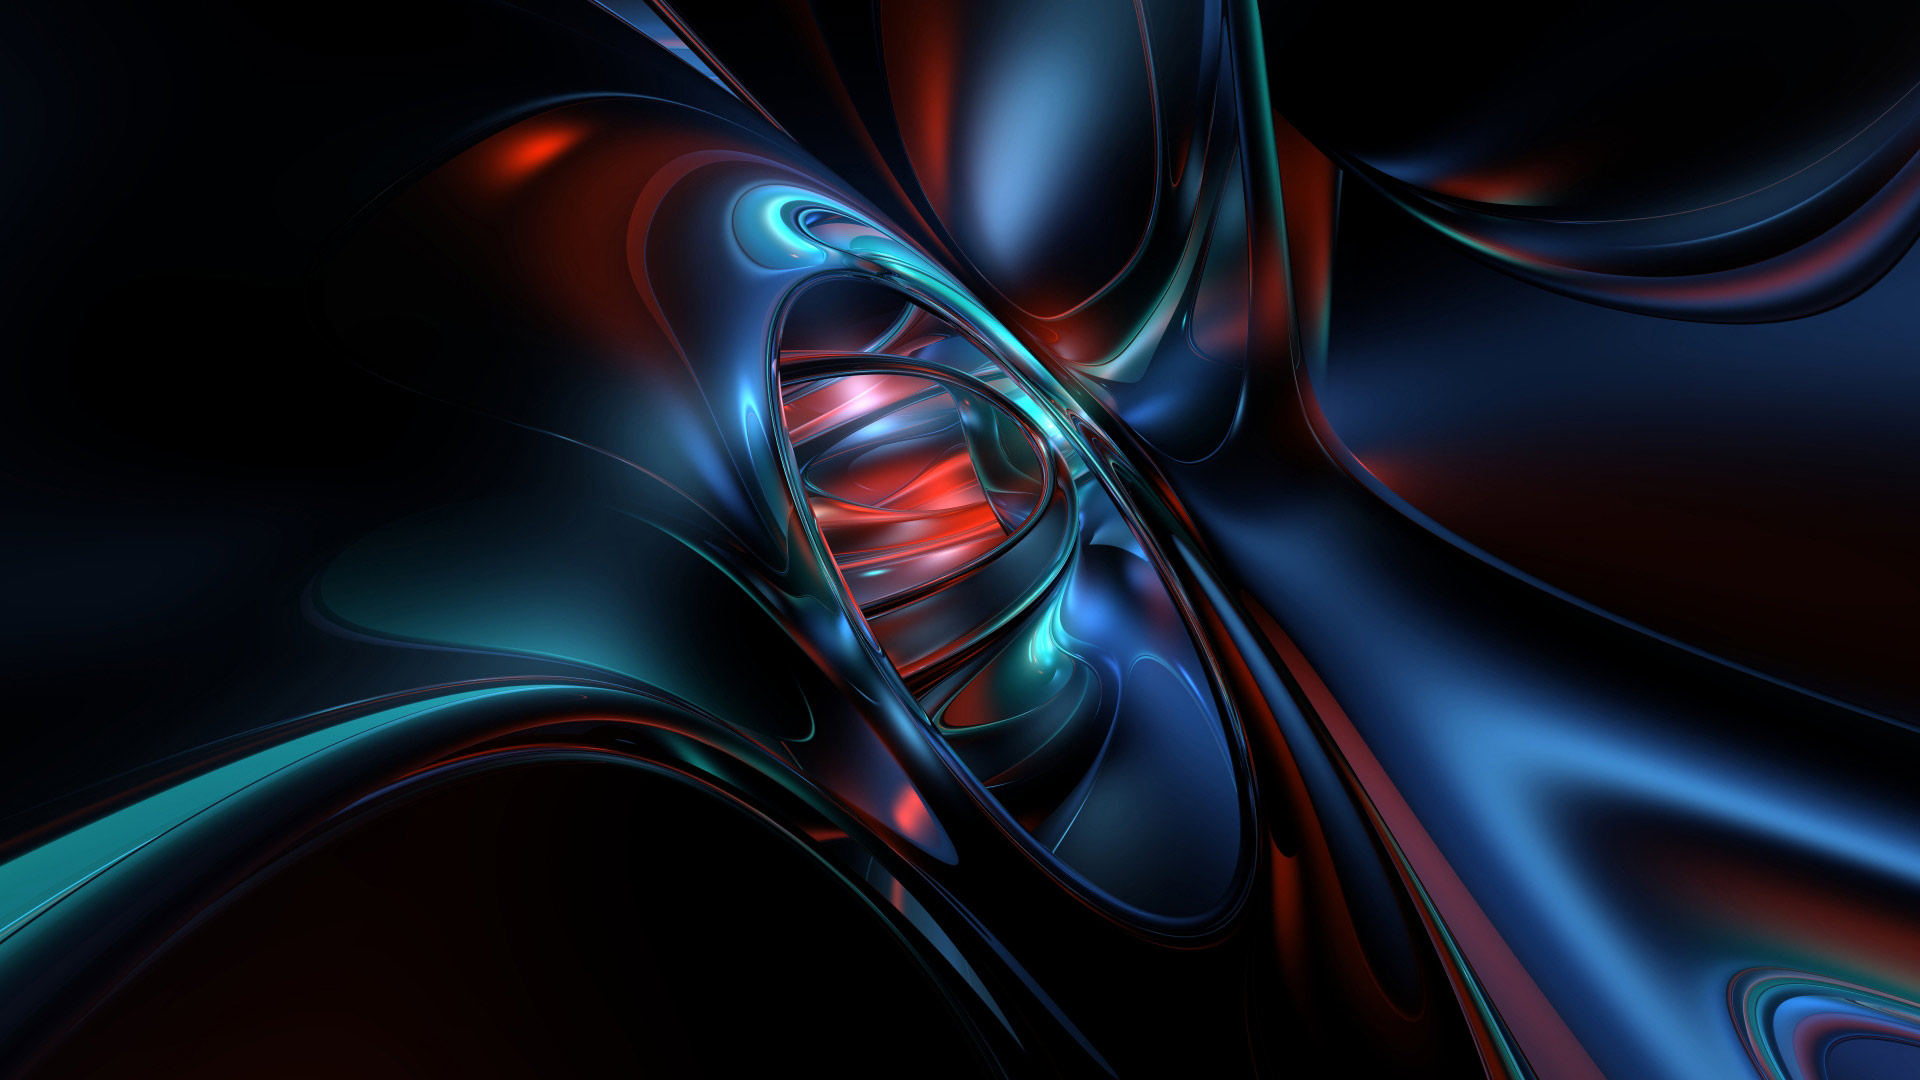 Free Download Abstract Desktop Background In Hd Widescreen - Blue Red And Black , HD Wallpaper & Backgrounds